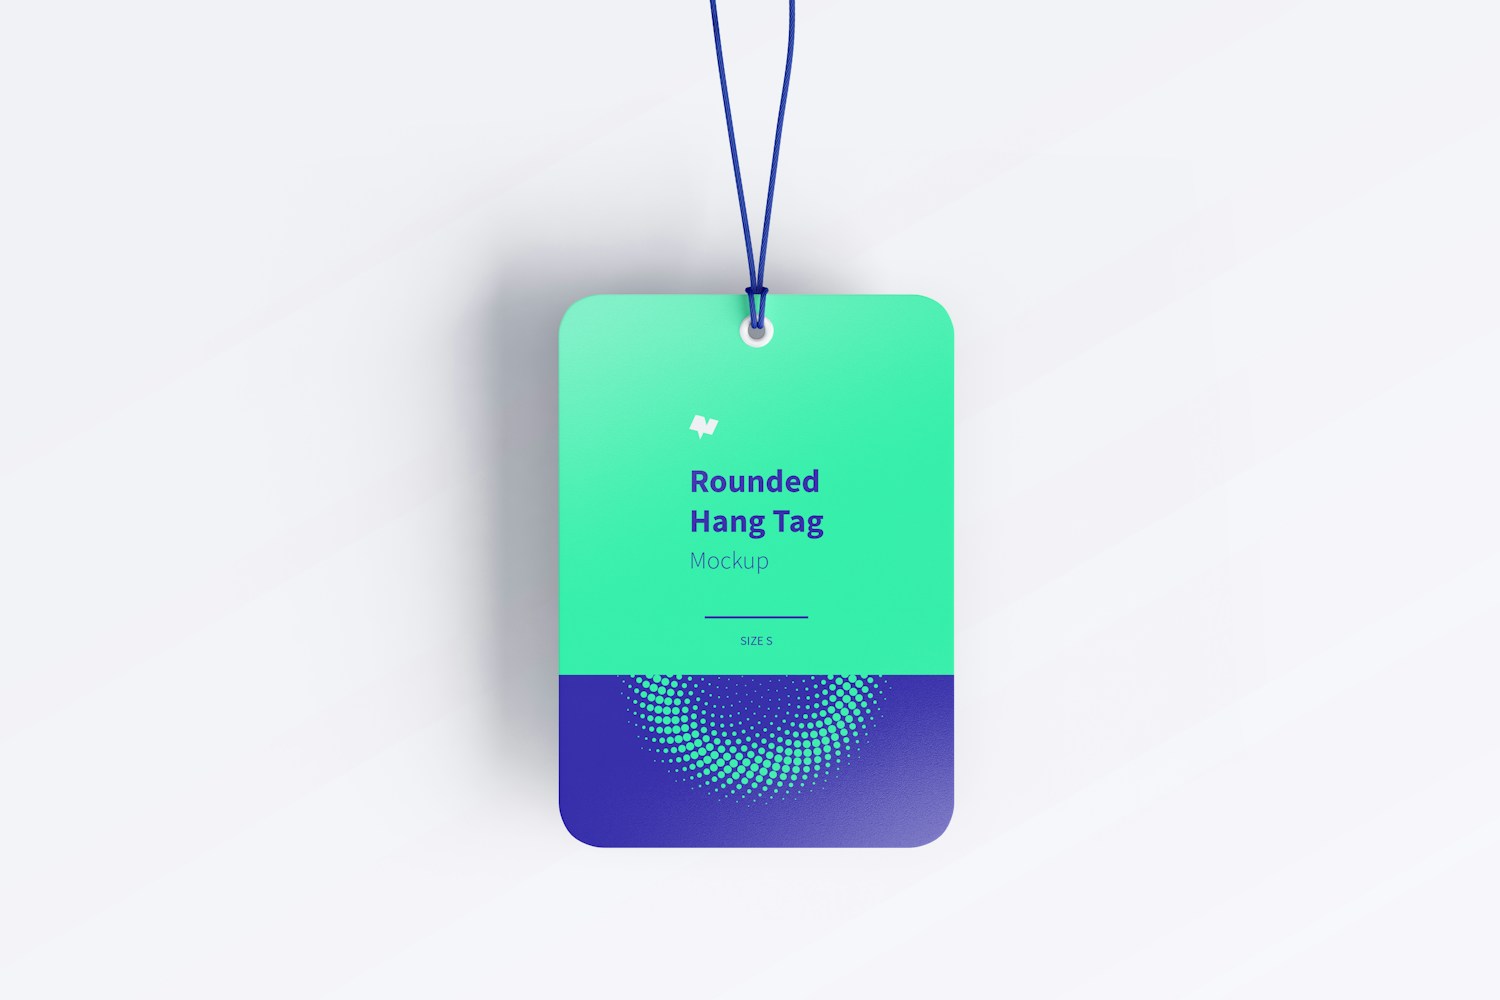 Rounded Hang Tag Mockup with String